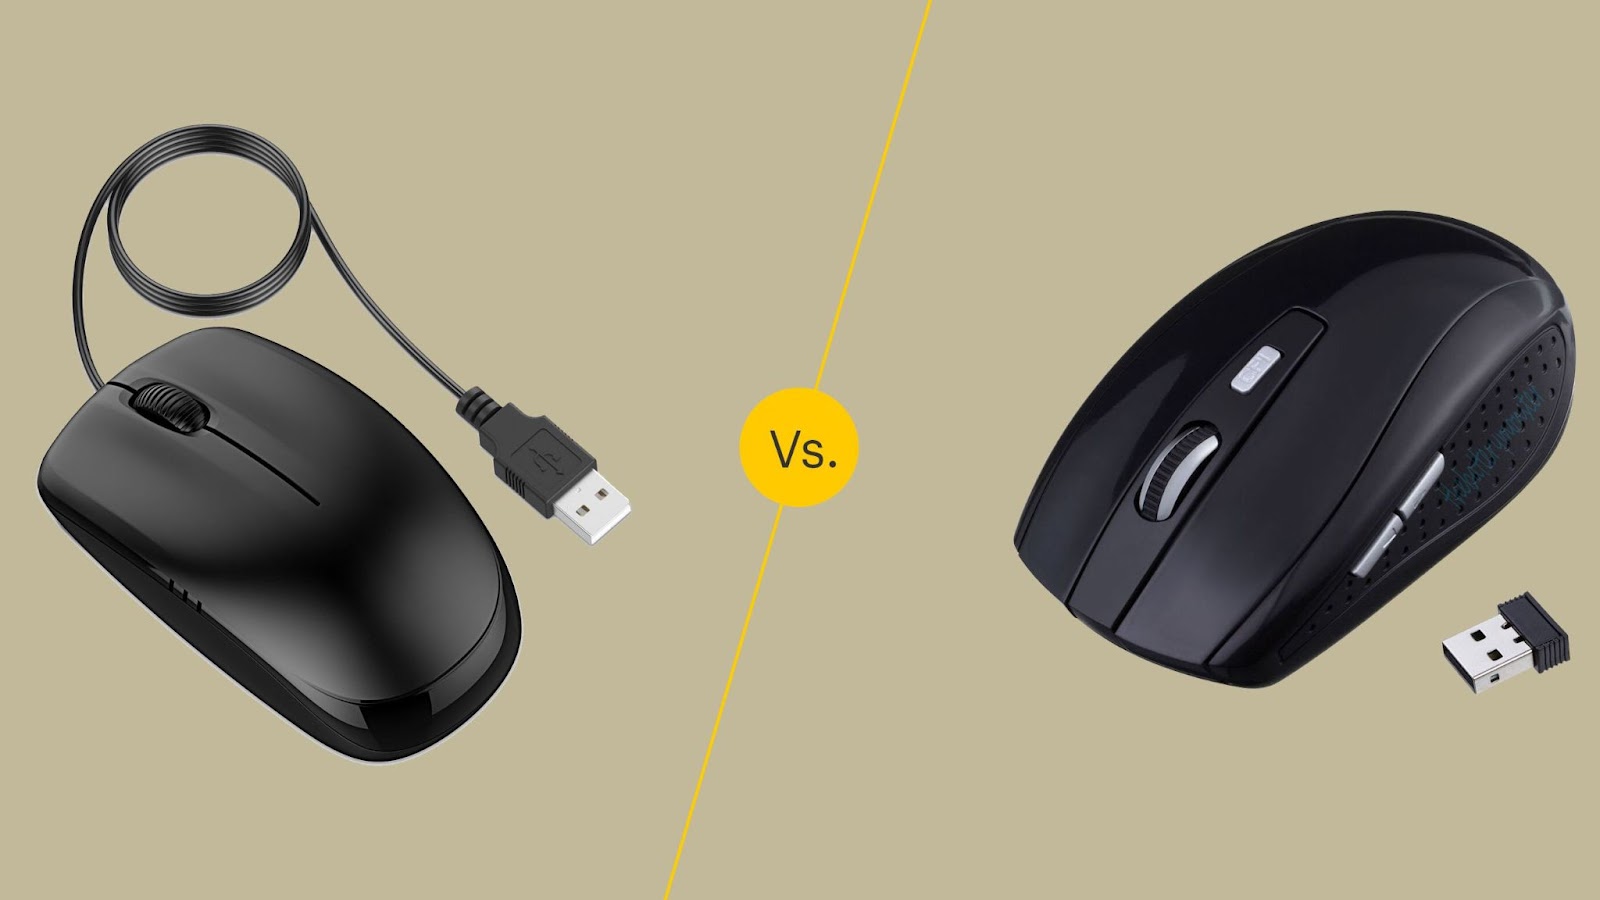 An important gaming mouse spec to think about is whether it is wired or wireless as this can affect your gaming performance if your wireless mouse is affected by interference from other bluetooth devices.